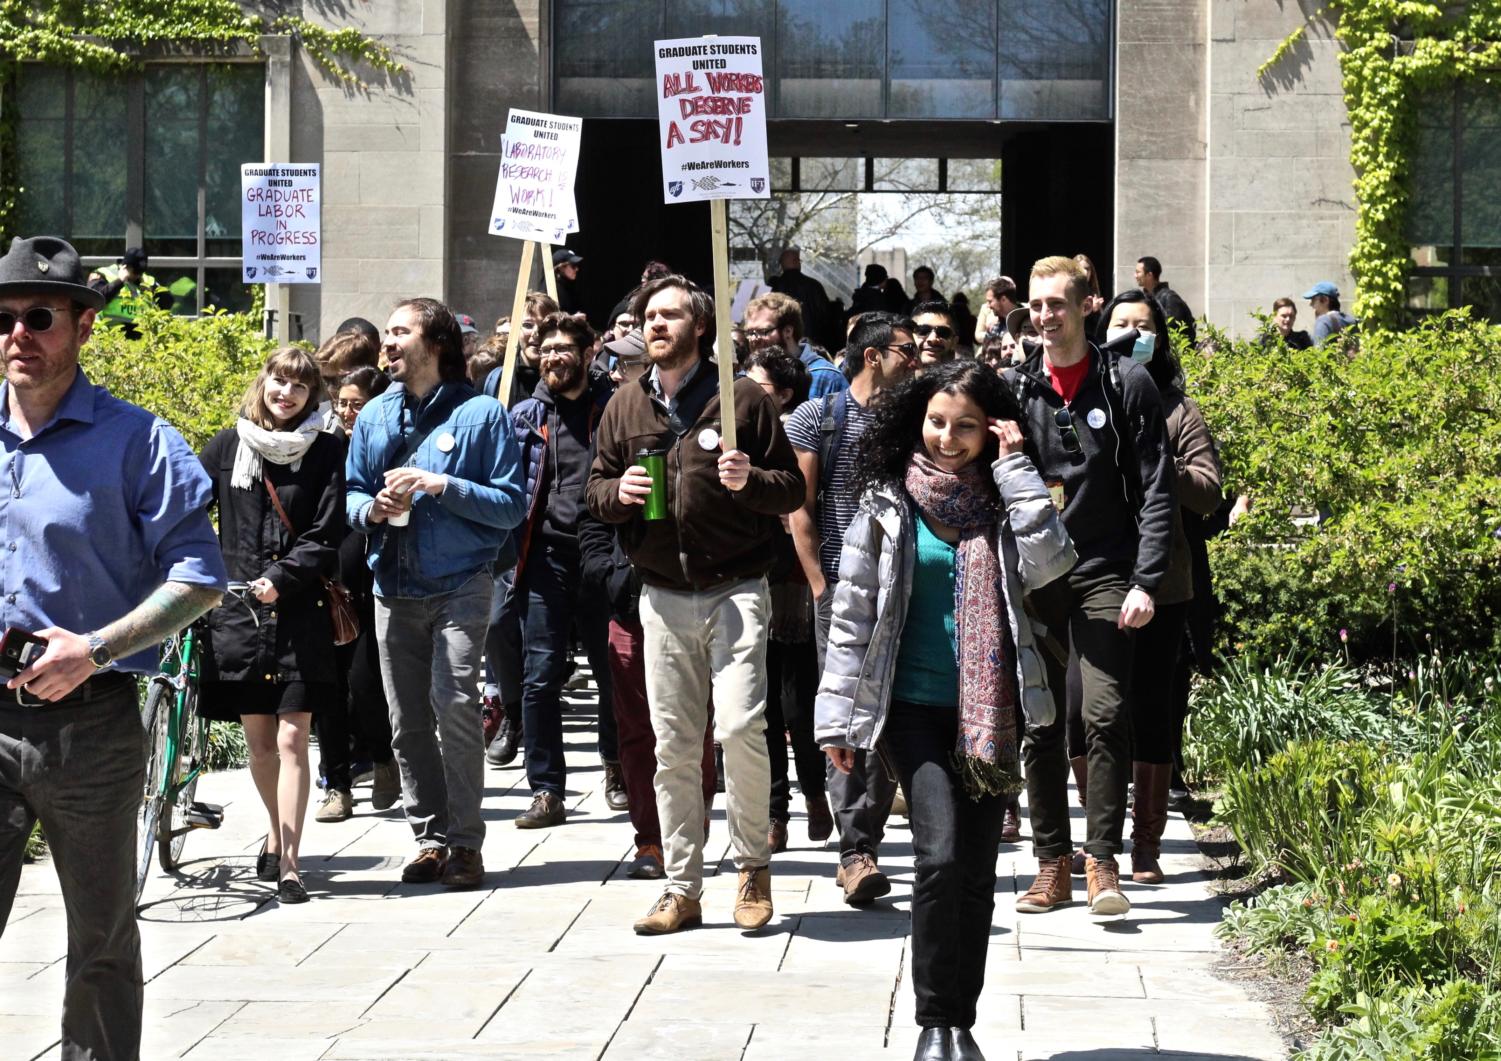 Graduate Students United members rally on the Quad in May 2017.